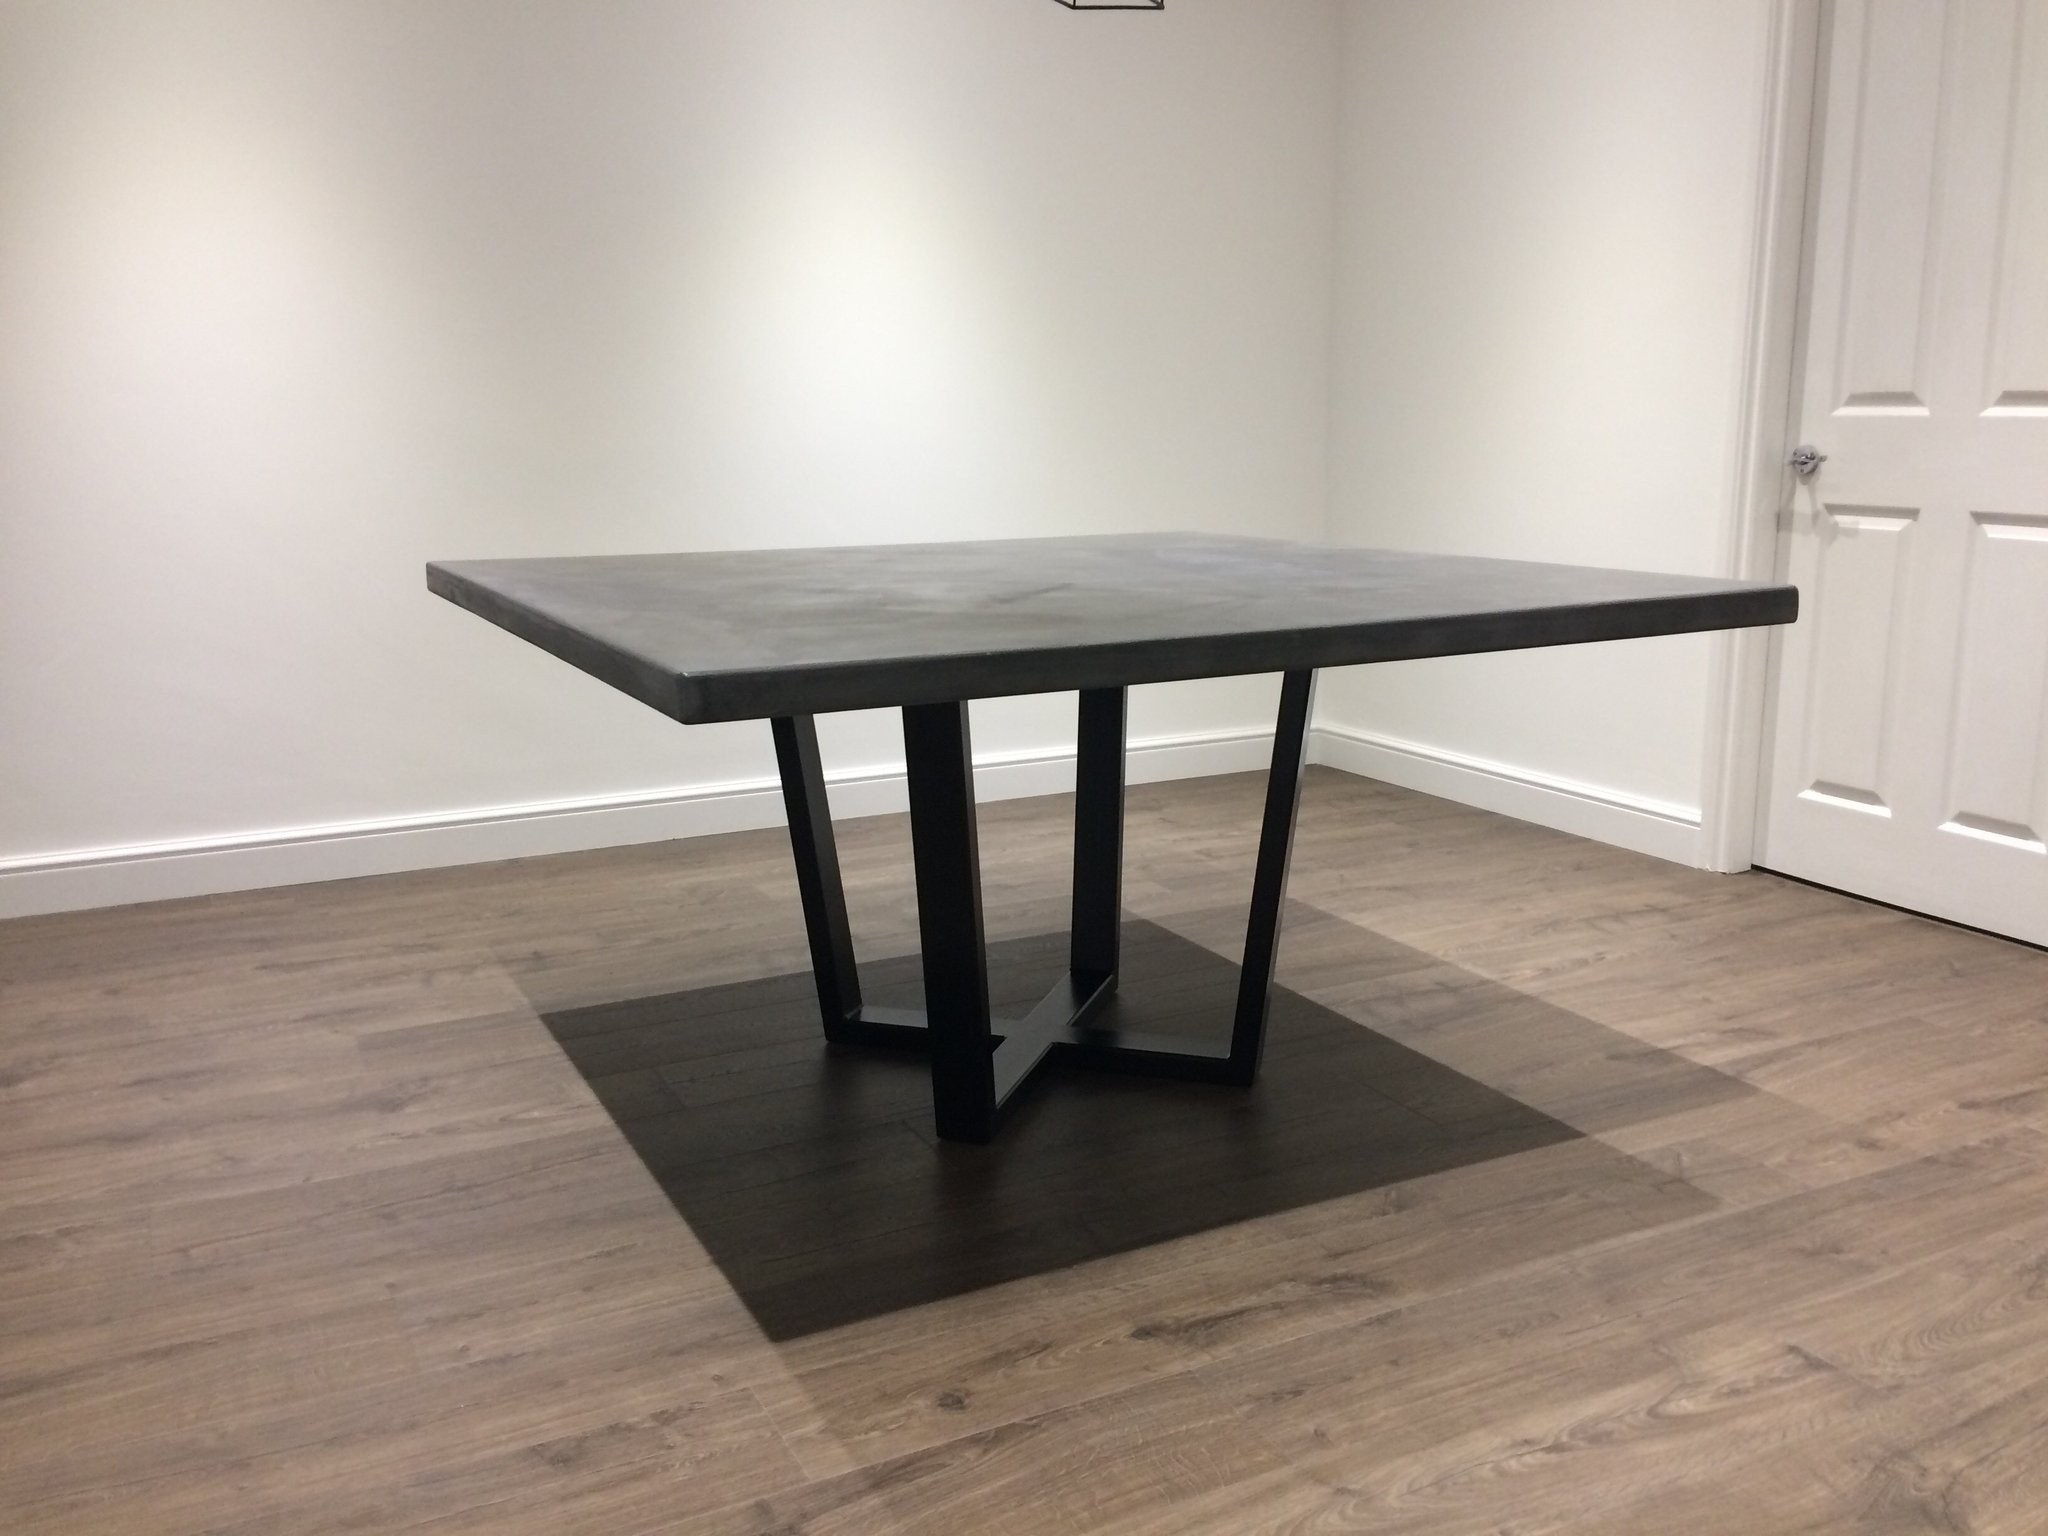 Mid grey polished concrete square dining table with steel